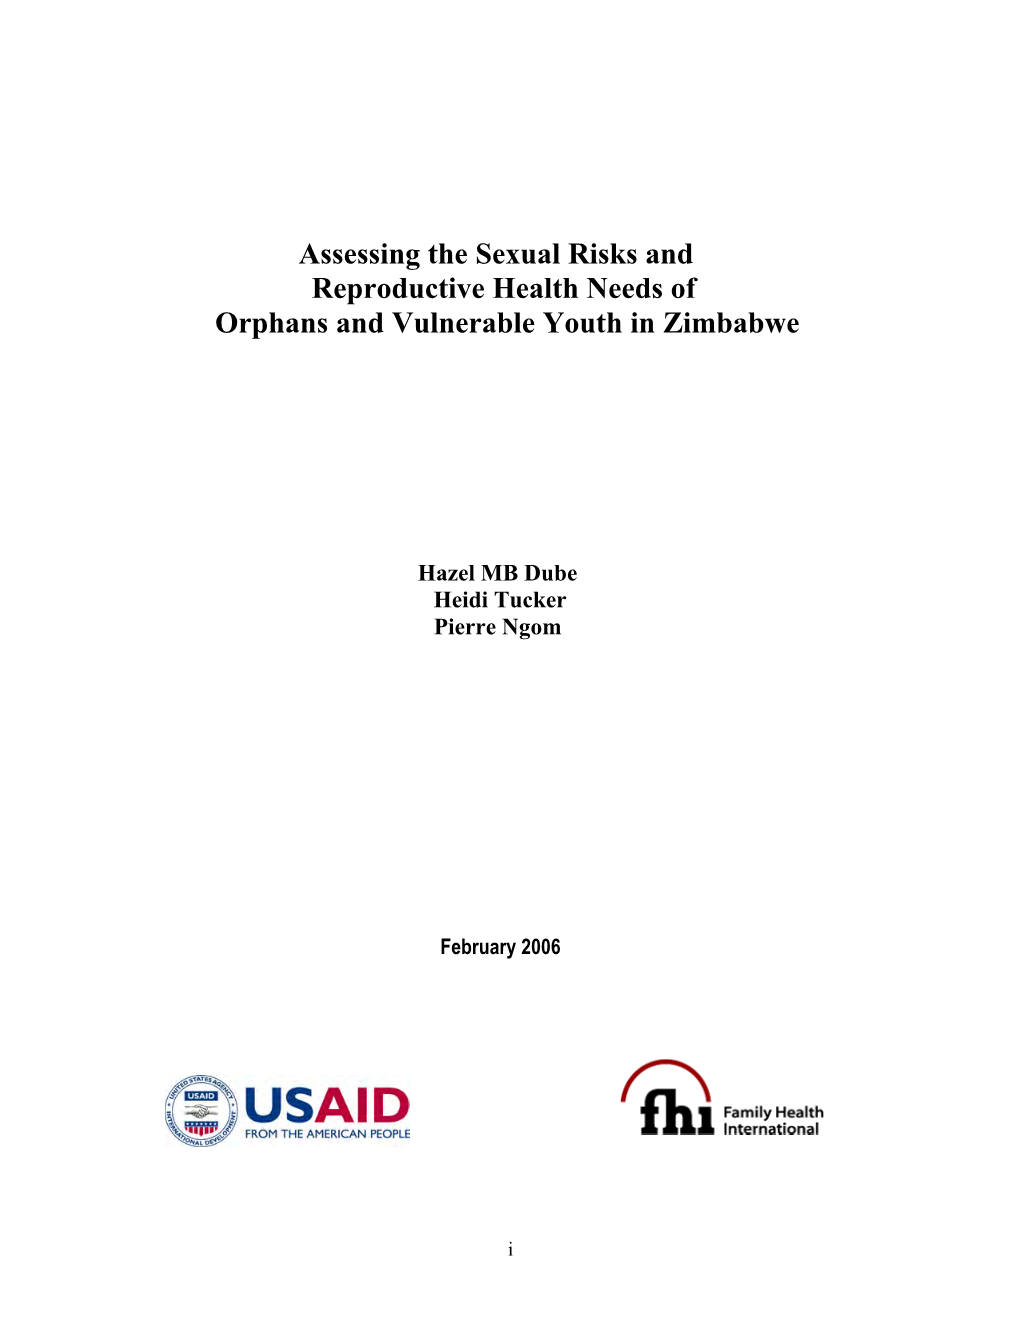 Assessing the Sexual Risks and Reproductive Health Needs of Orphans and Vulnerable Youth in Zimbabwe